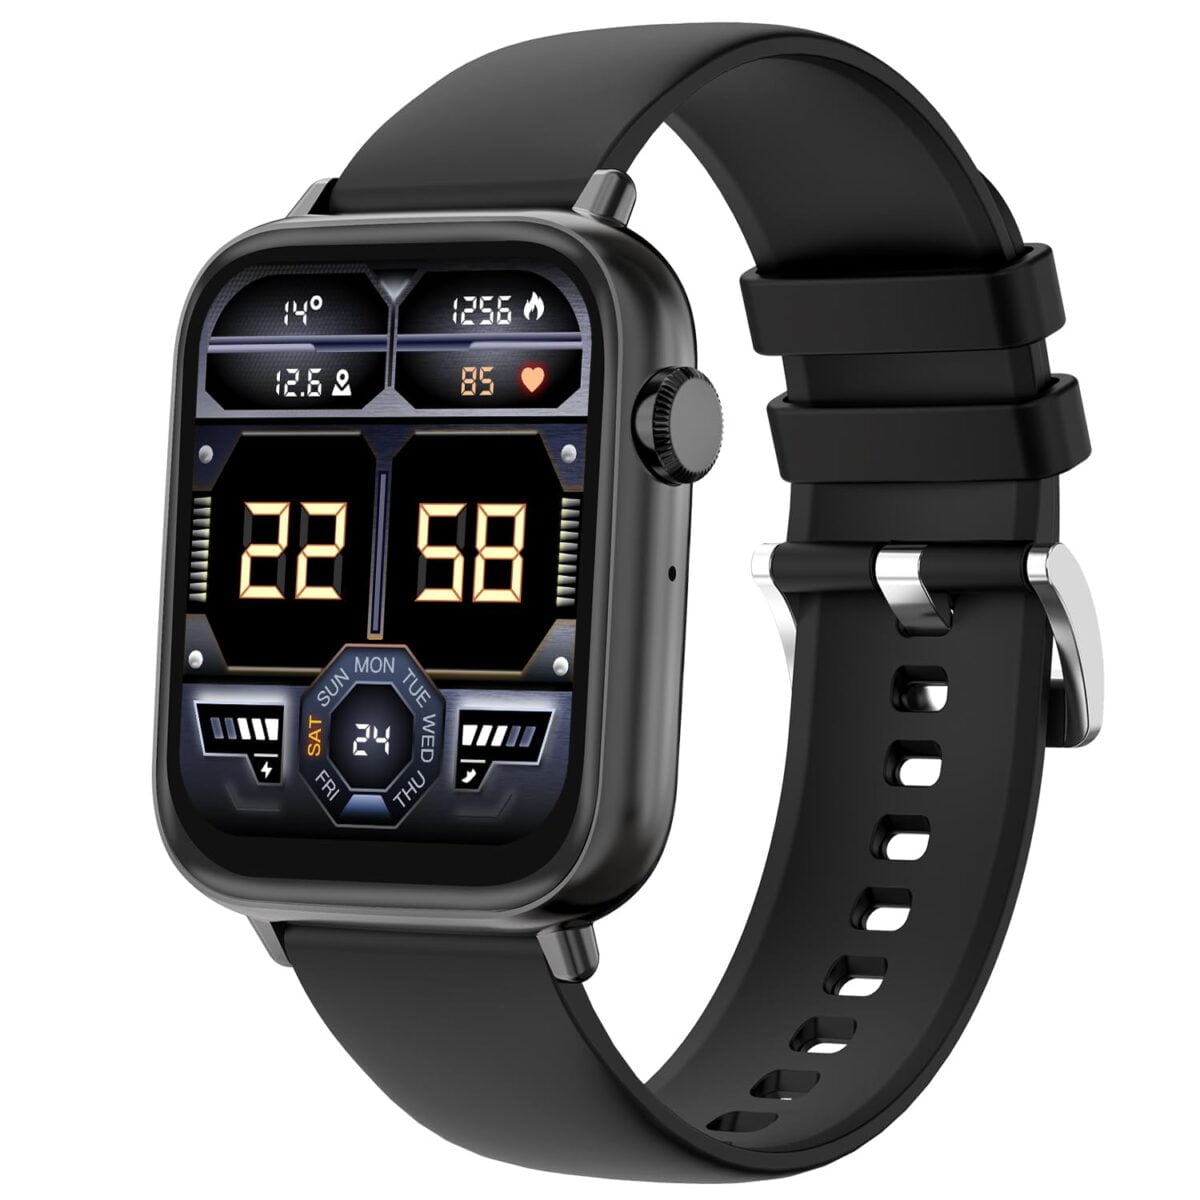 Fire-boltt newly launched ninja fit pro smartwatch